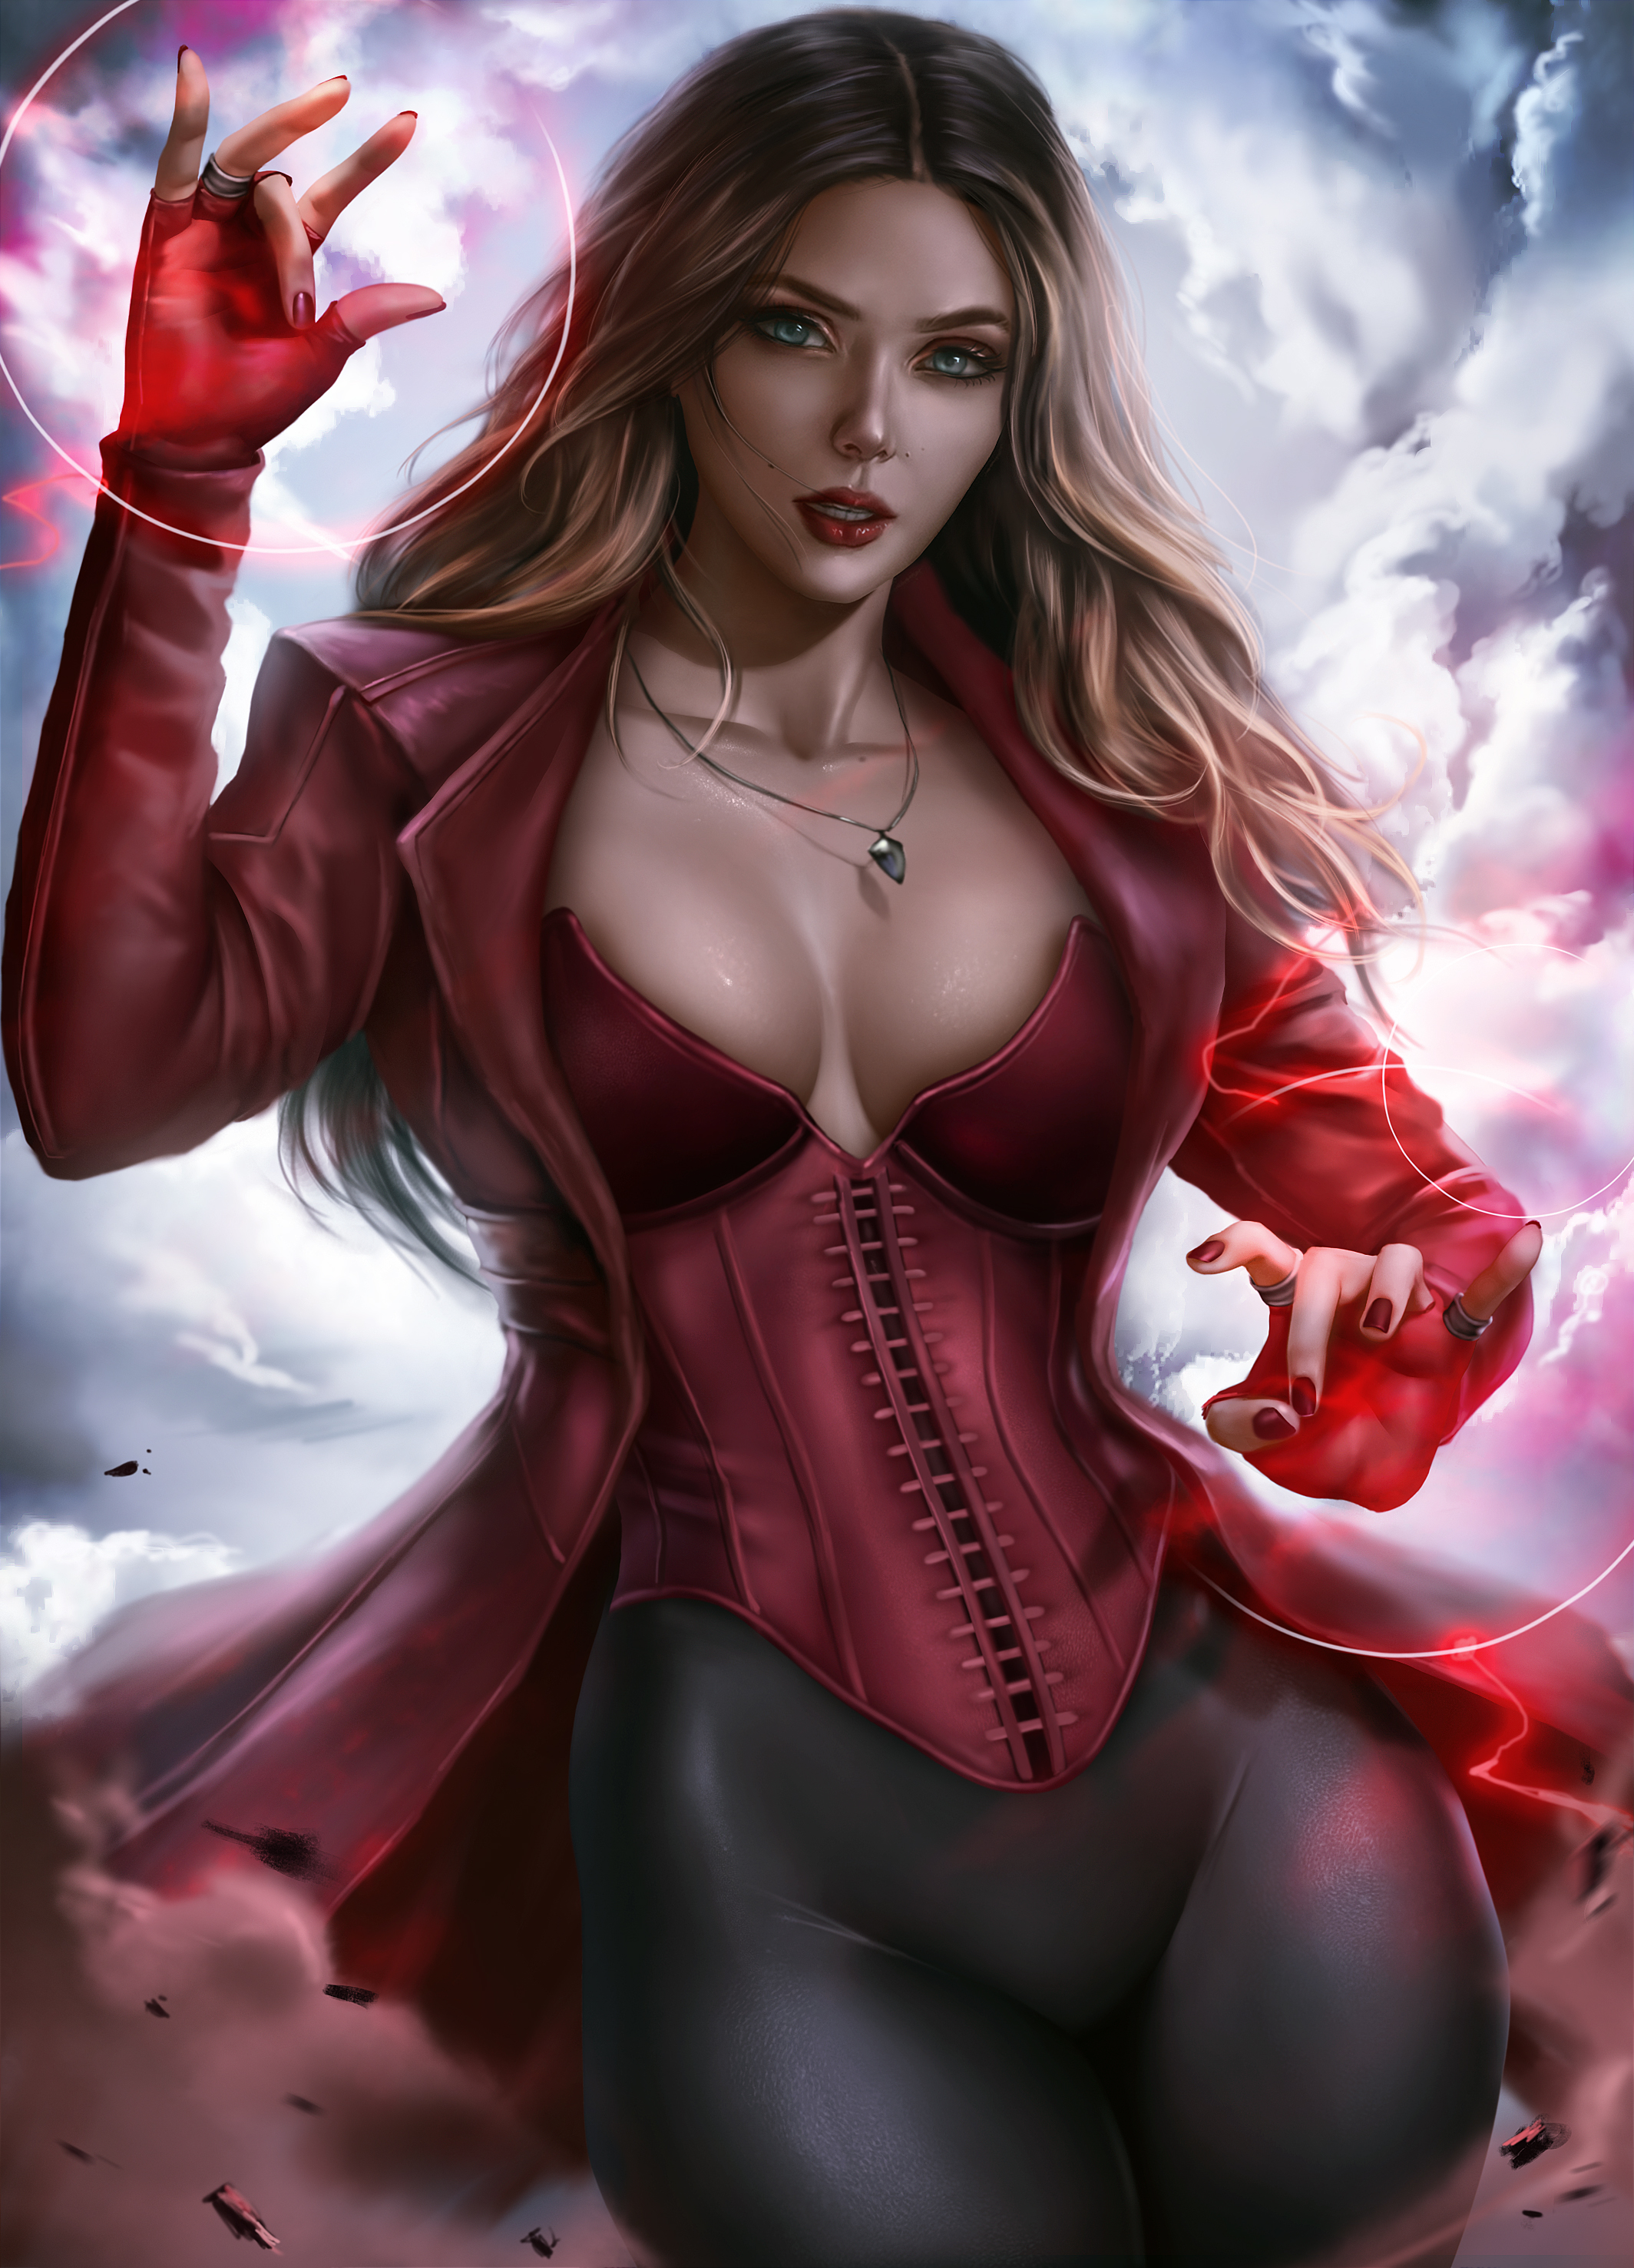 General 2128x2953 Scarlet Witch Marvel Comics Marvel Cinematic Universe superheroines women brunette long hair looking at viewer red lipstick necklace cleavage coats corset leggings fingerless gloves red nails painted nails fantasy girl fictional character fan art clouds Logan Cure vertical Elizabeth Olsen 